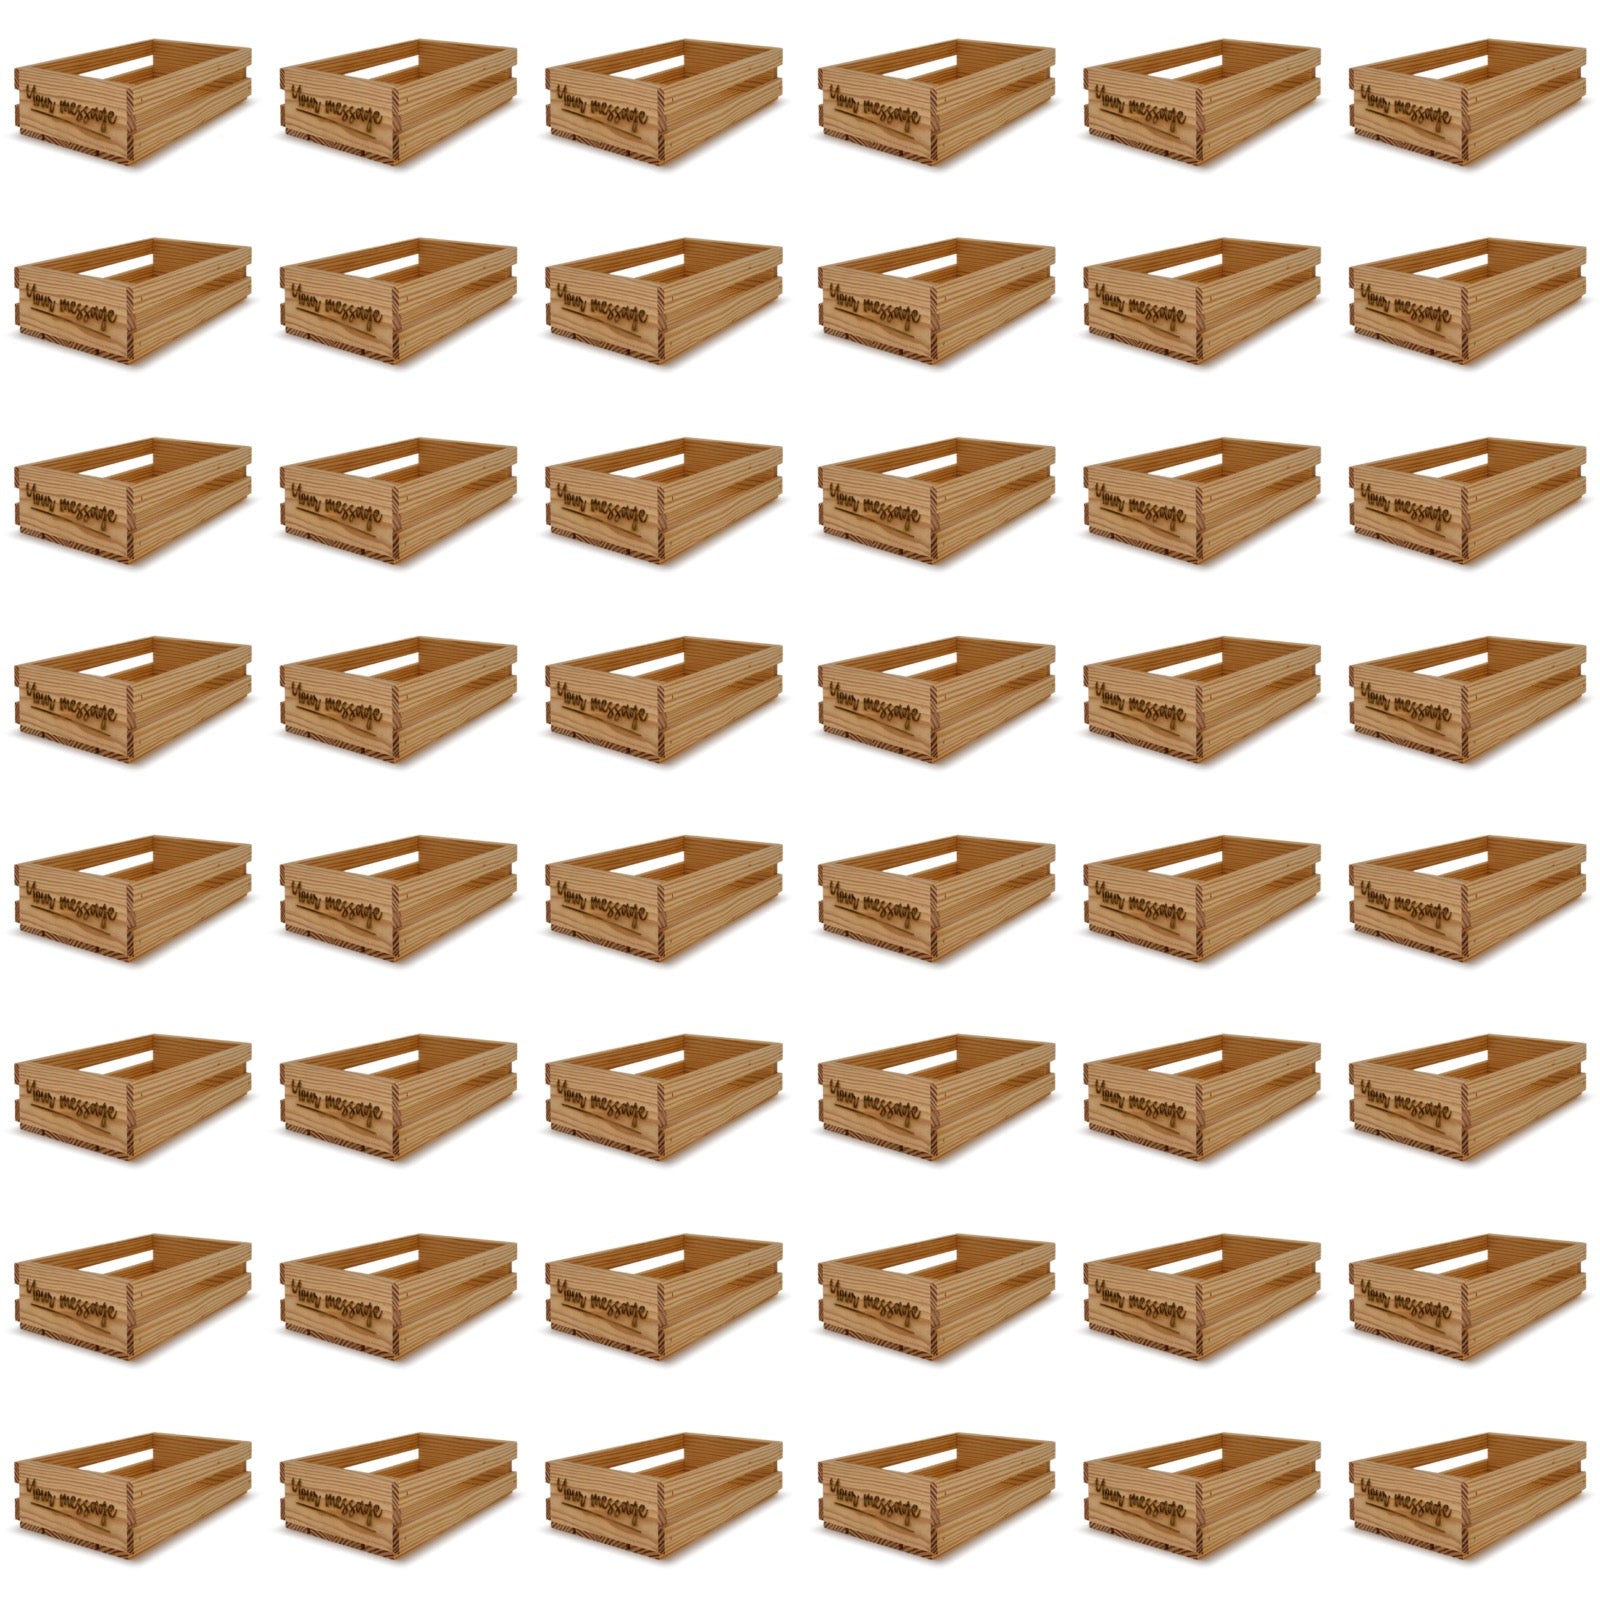 48 Small wooden crates 13x7.5x3.5 your message included